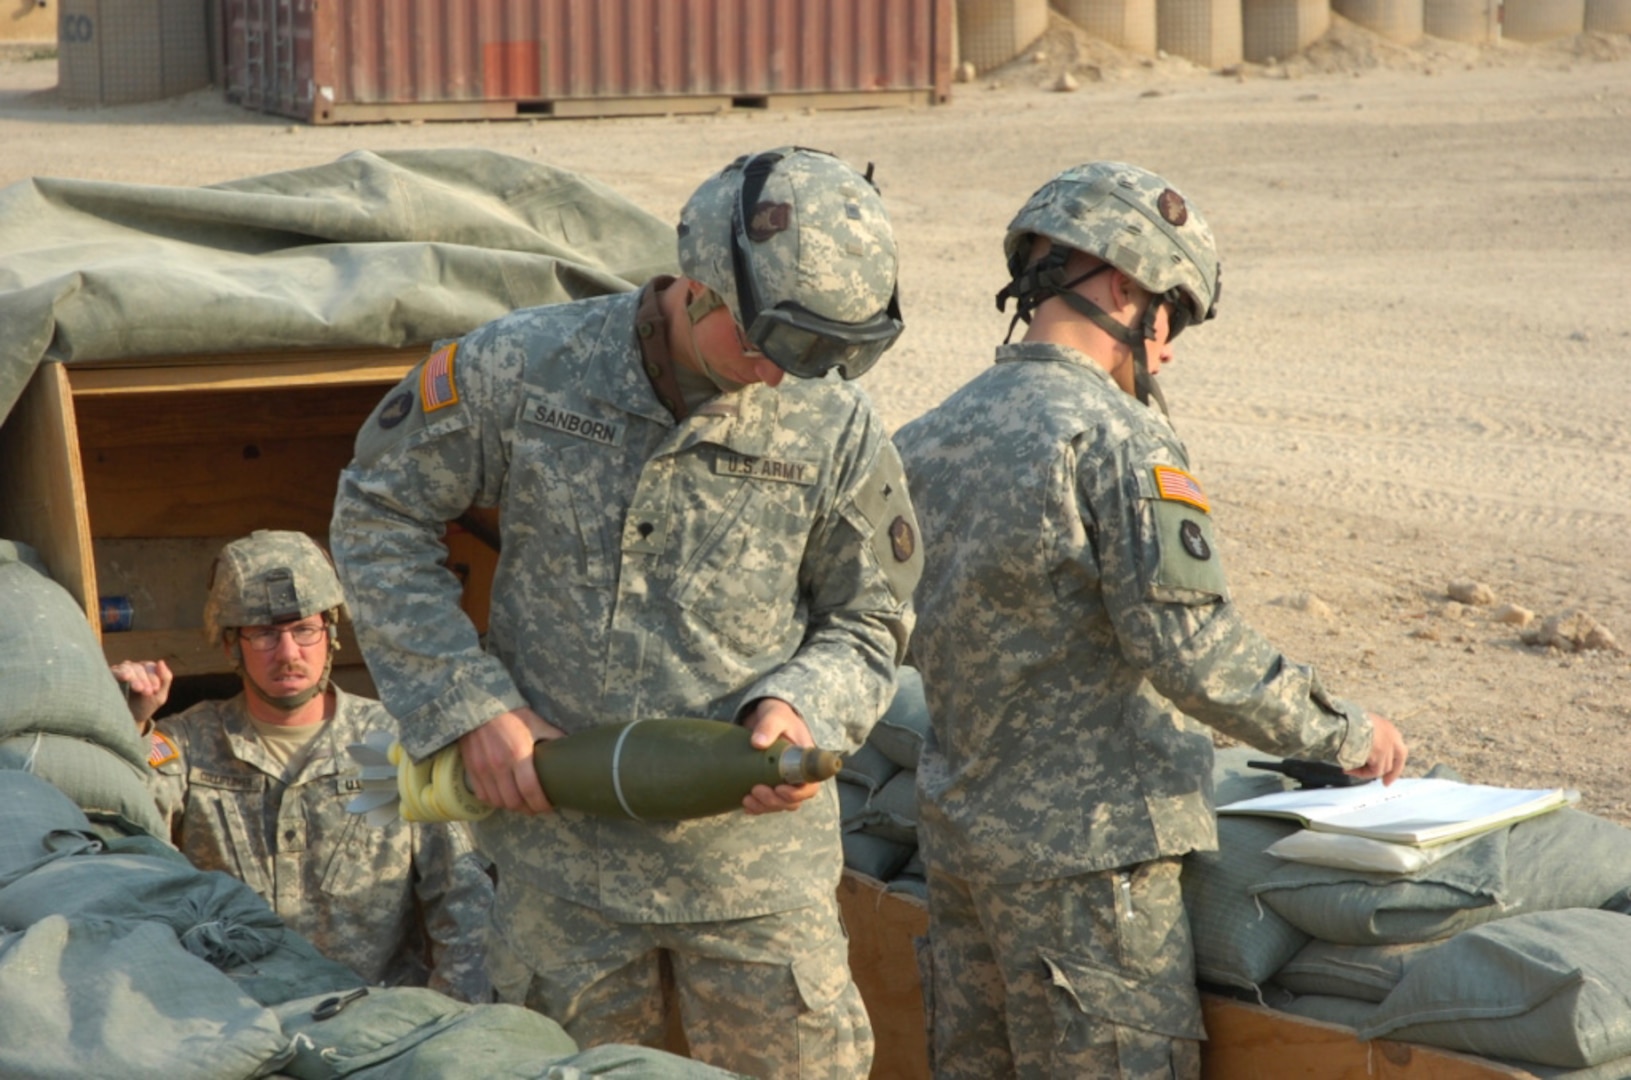 Spc. Anthony Sanborn of Alexandria, Minn., (center) checks the fuse setting of a 120 millimeter mortar as Spc. Steven Luitjens of St. Cloud, Minn., (right) tells him which setting to use during a drill earlier this month at Camp Fallujah, Iraq. Spc. Chris Colliflower of Roseau, Minn., is at the left. All Soldiers are from Company B, 2nd Battalion, 136th Combined Arms Battalion, 1st Brigade Combat Team, 34th Infantry Division.